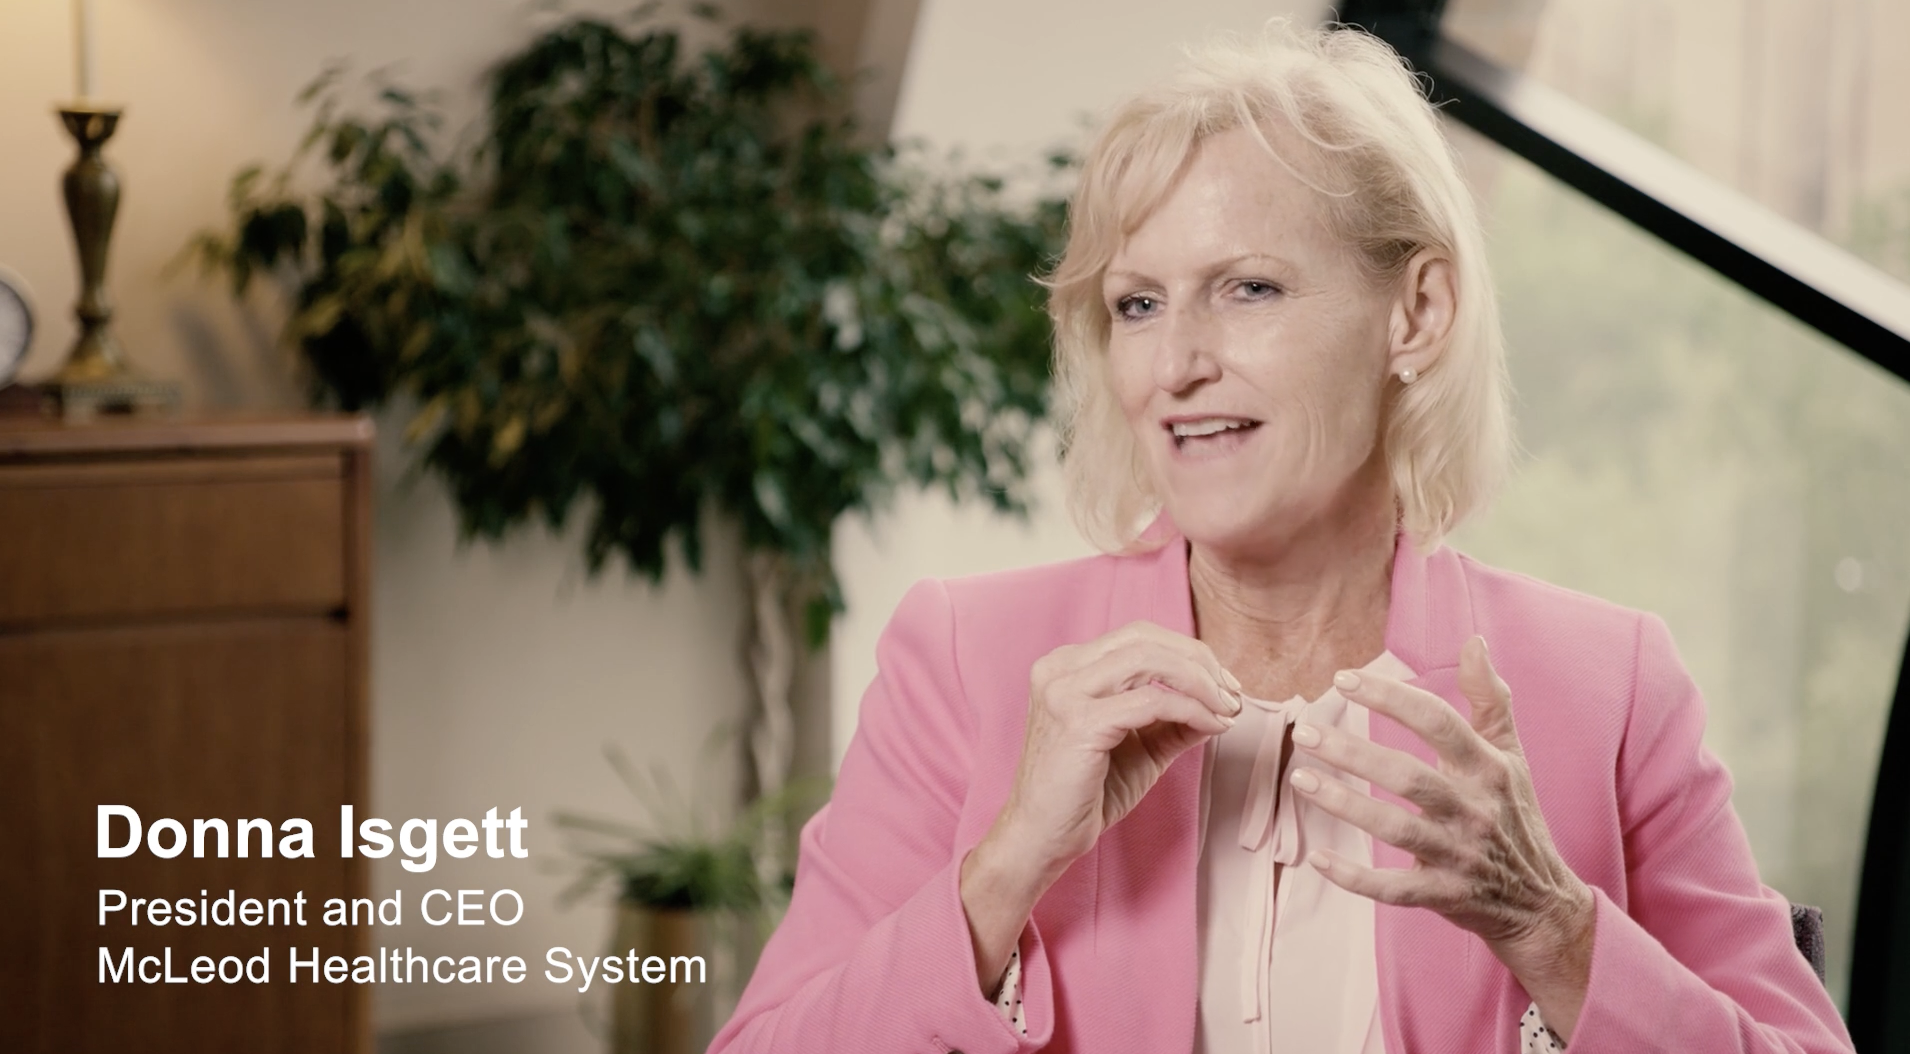 McLeod Health CEO Donna Isgett discusses her experience with Ascendient's Healthytown model for strategic planning